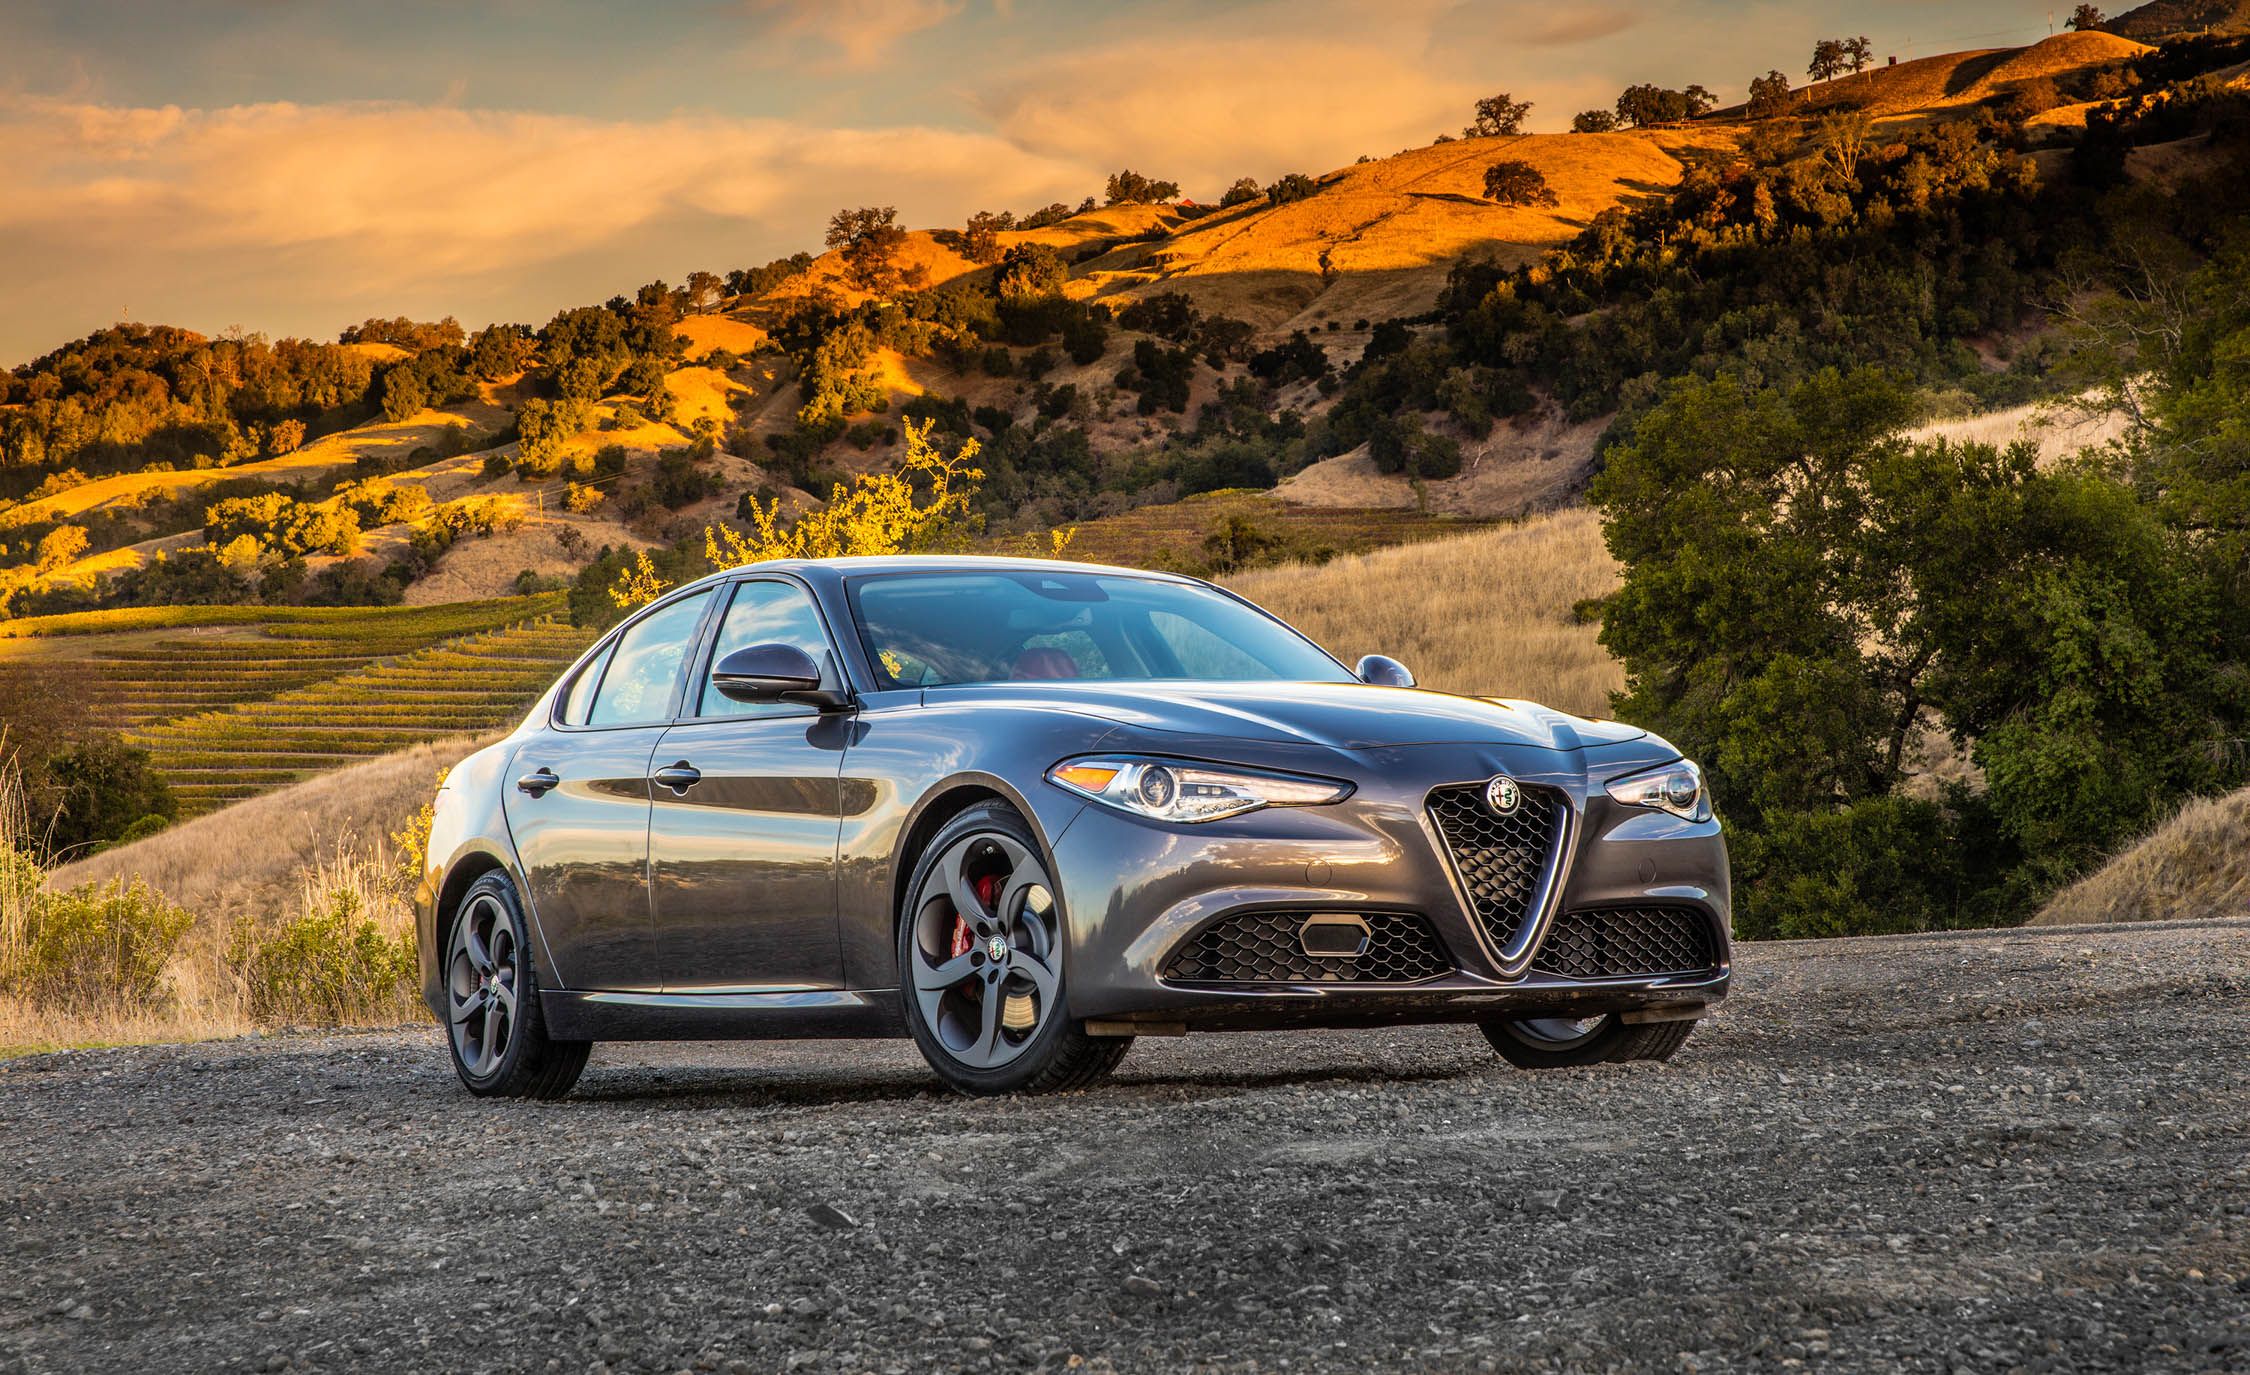 The 15 Most Beautiful Cars under $50K That You Can Buy Right Now  Flipbook  Car and Driver